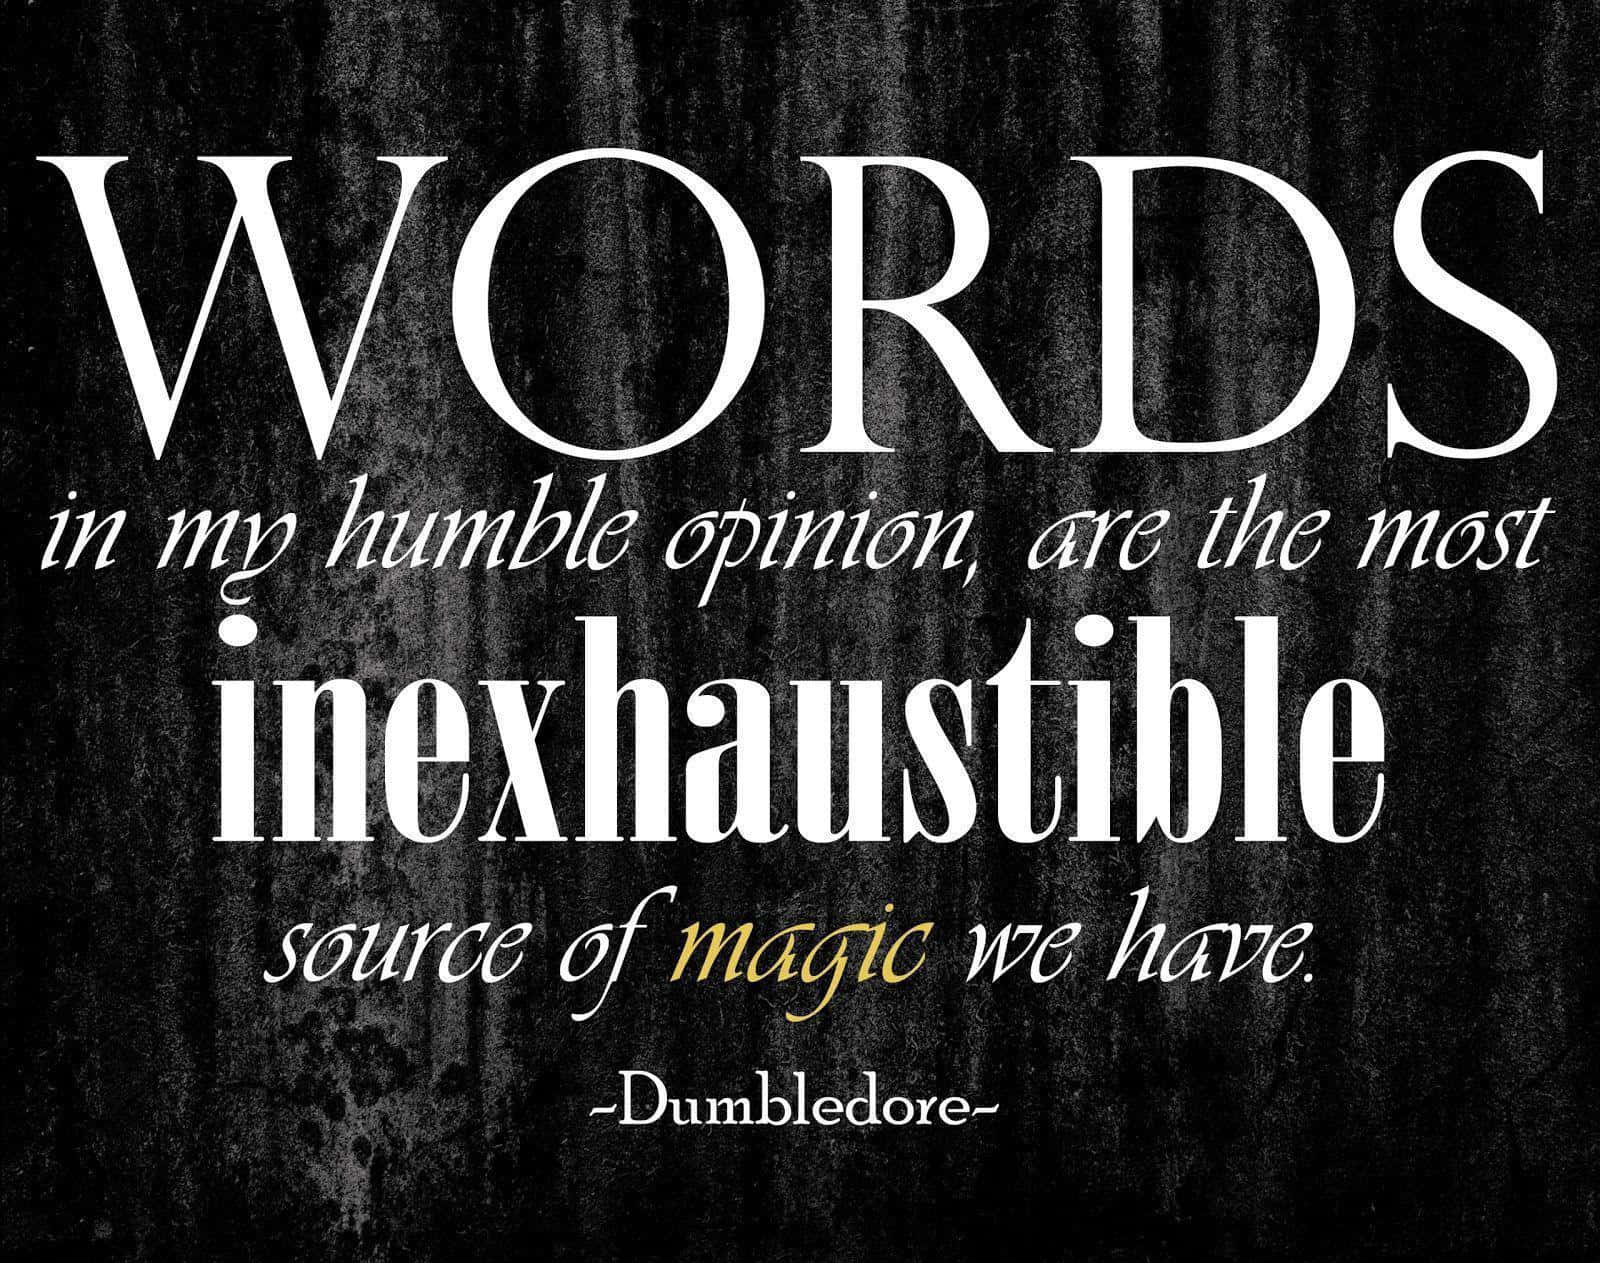 harry potter quotes wallpaper hd